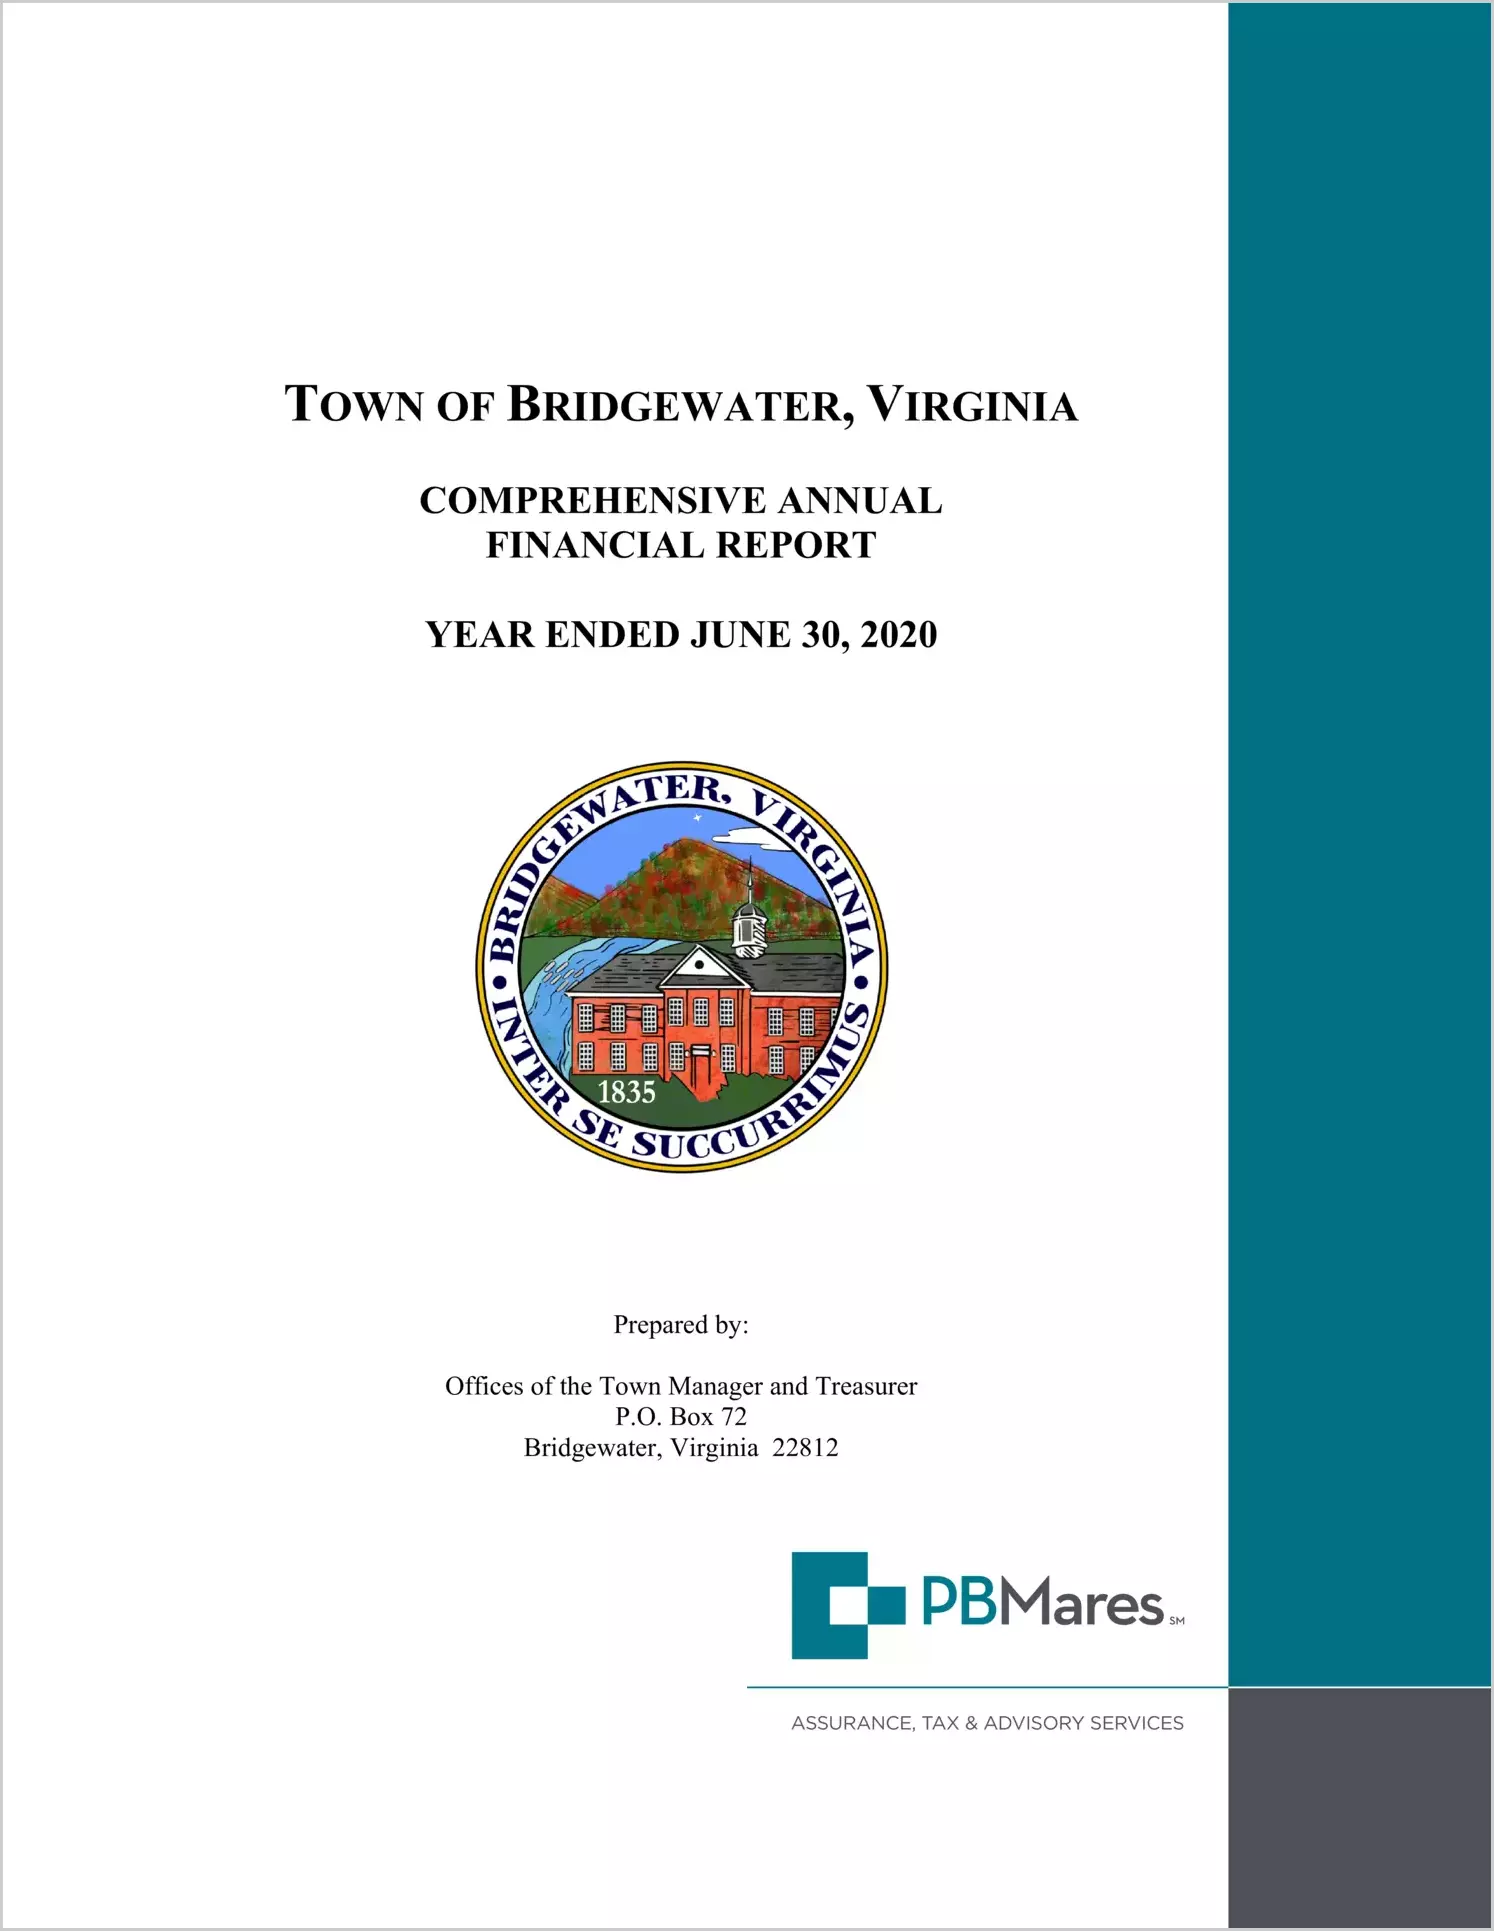 2020 Annual Financial Report for Town of Bridgewater